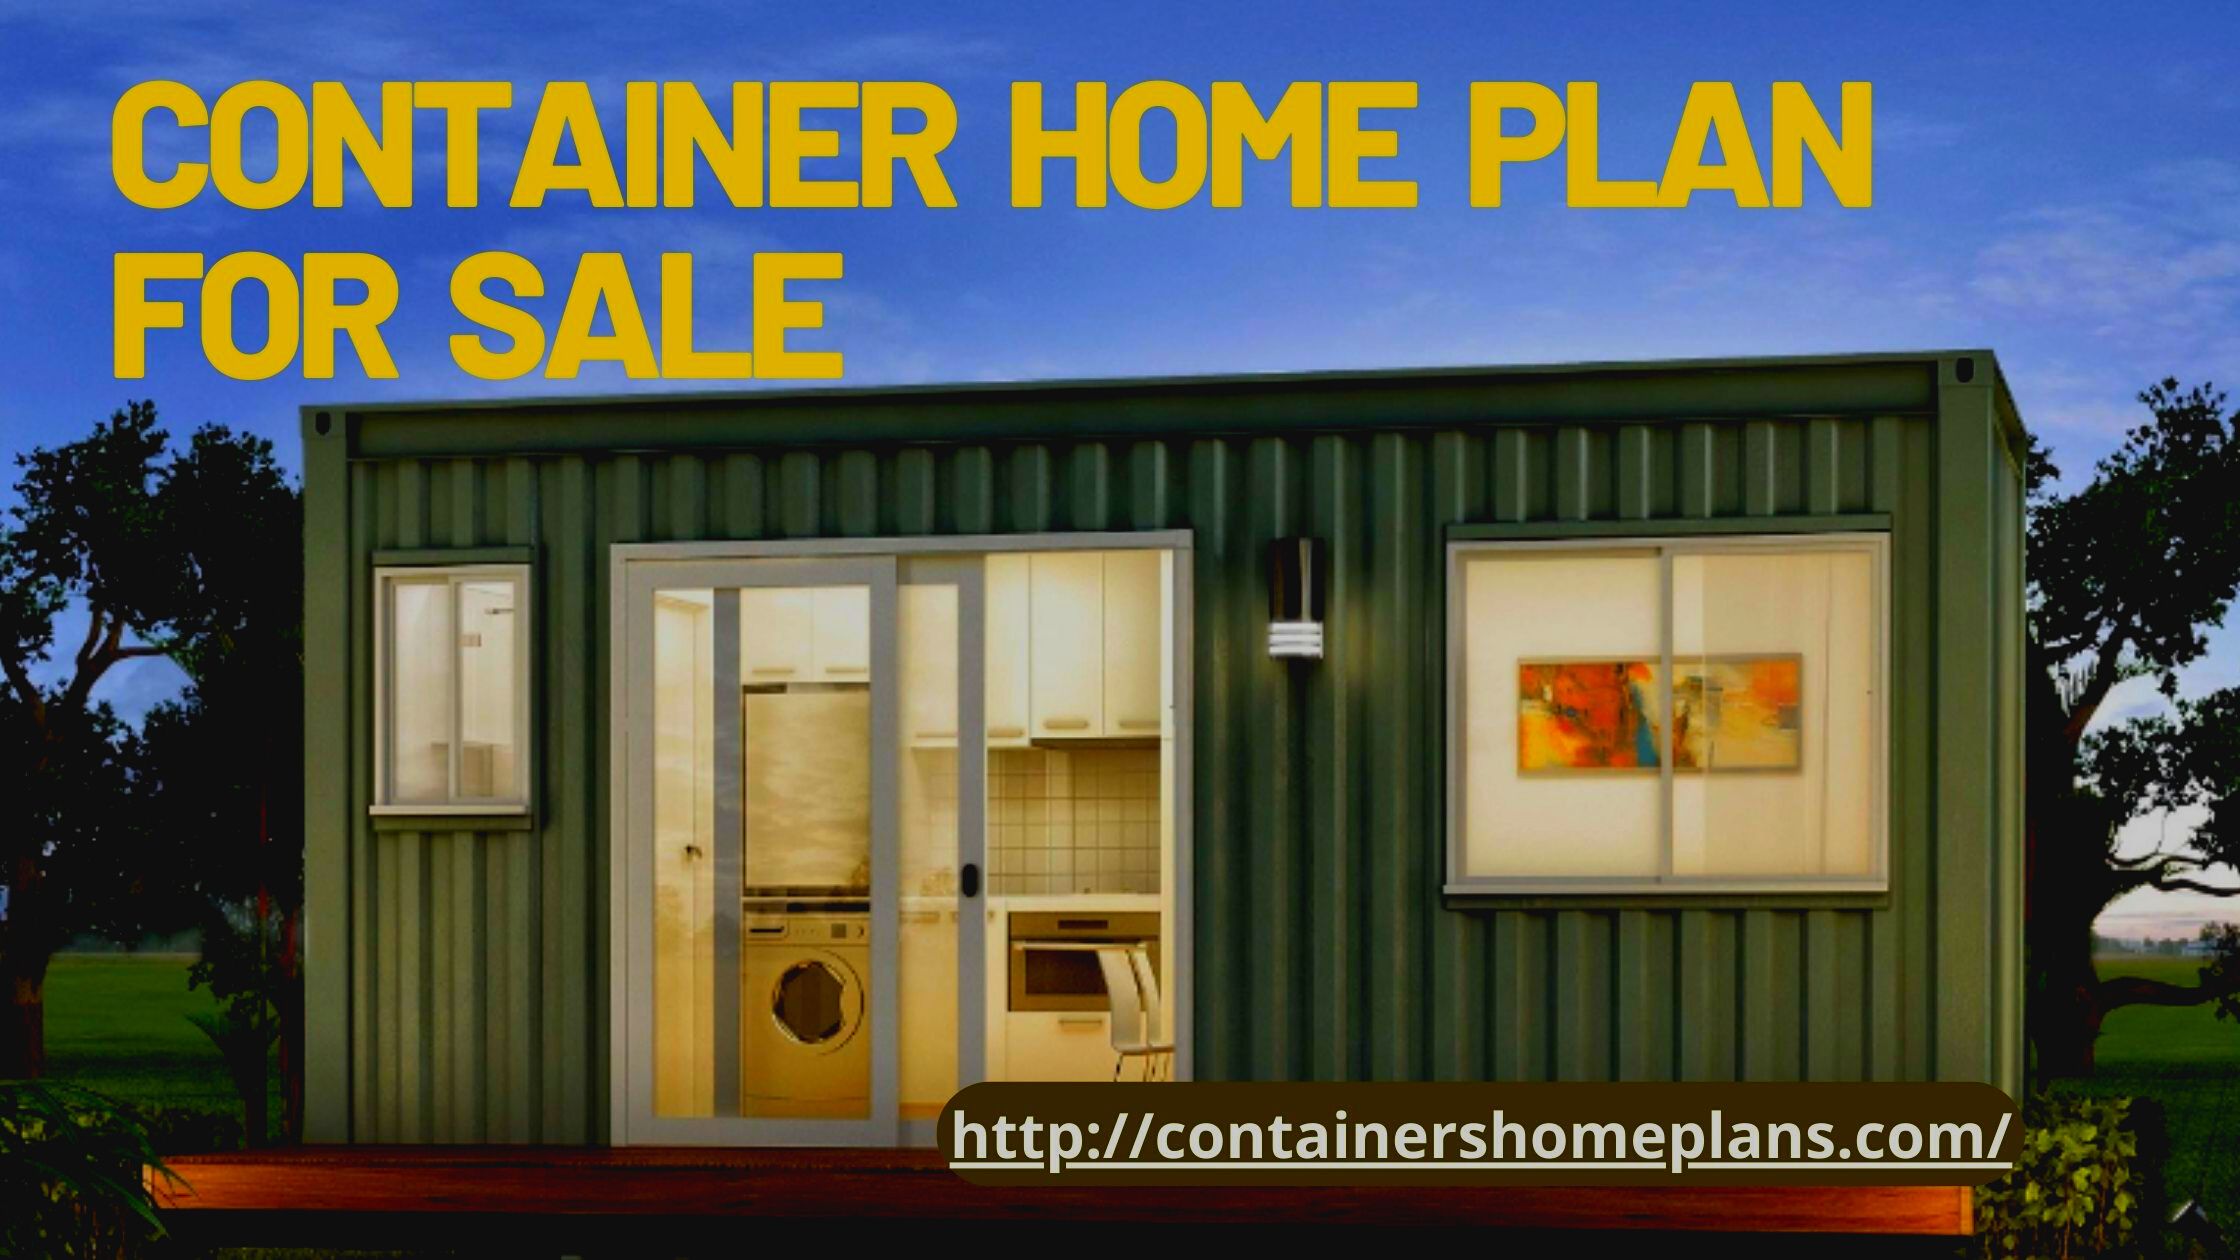 Container home plan for sale